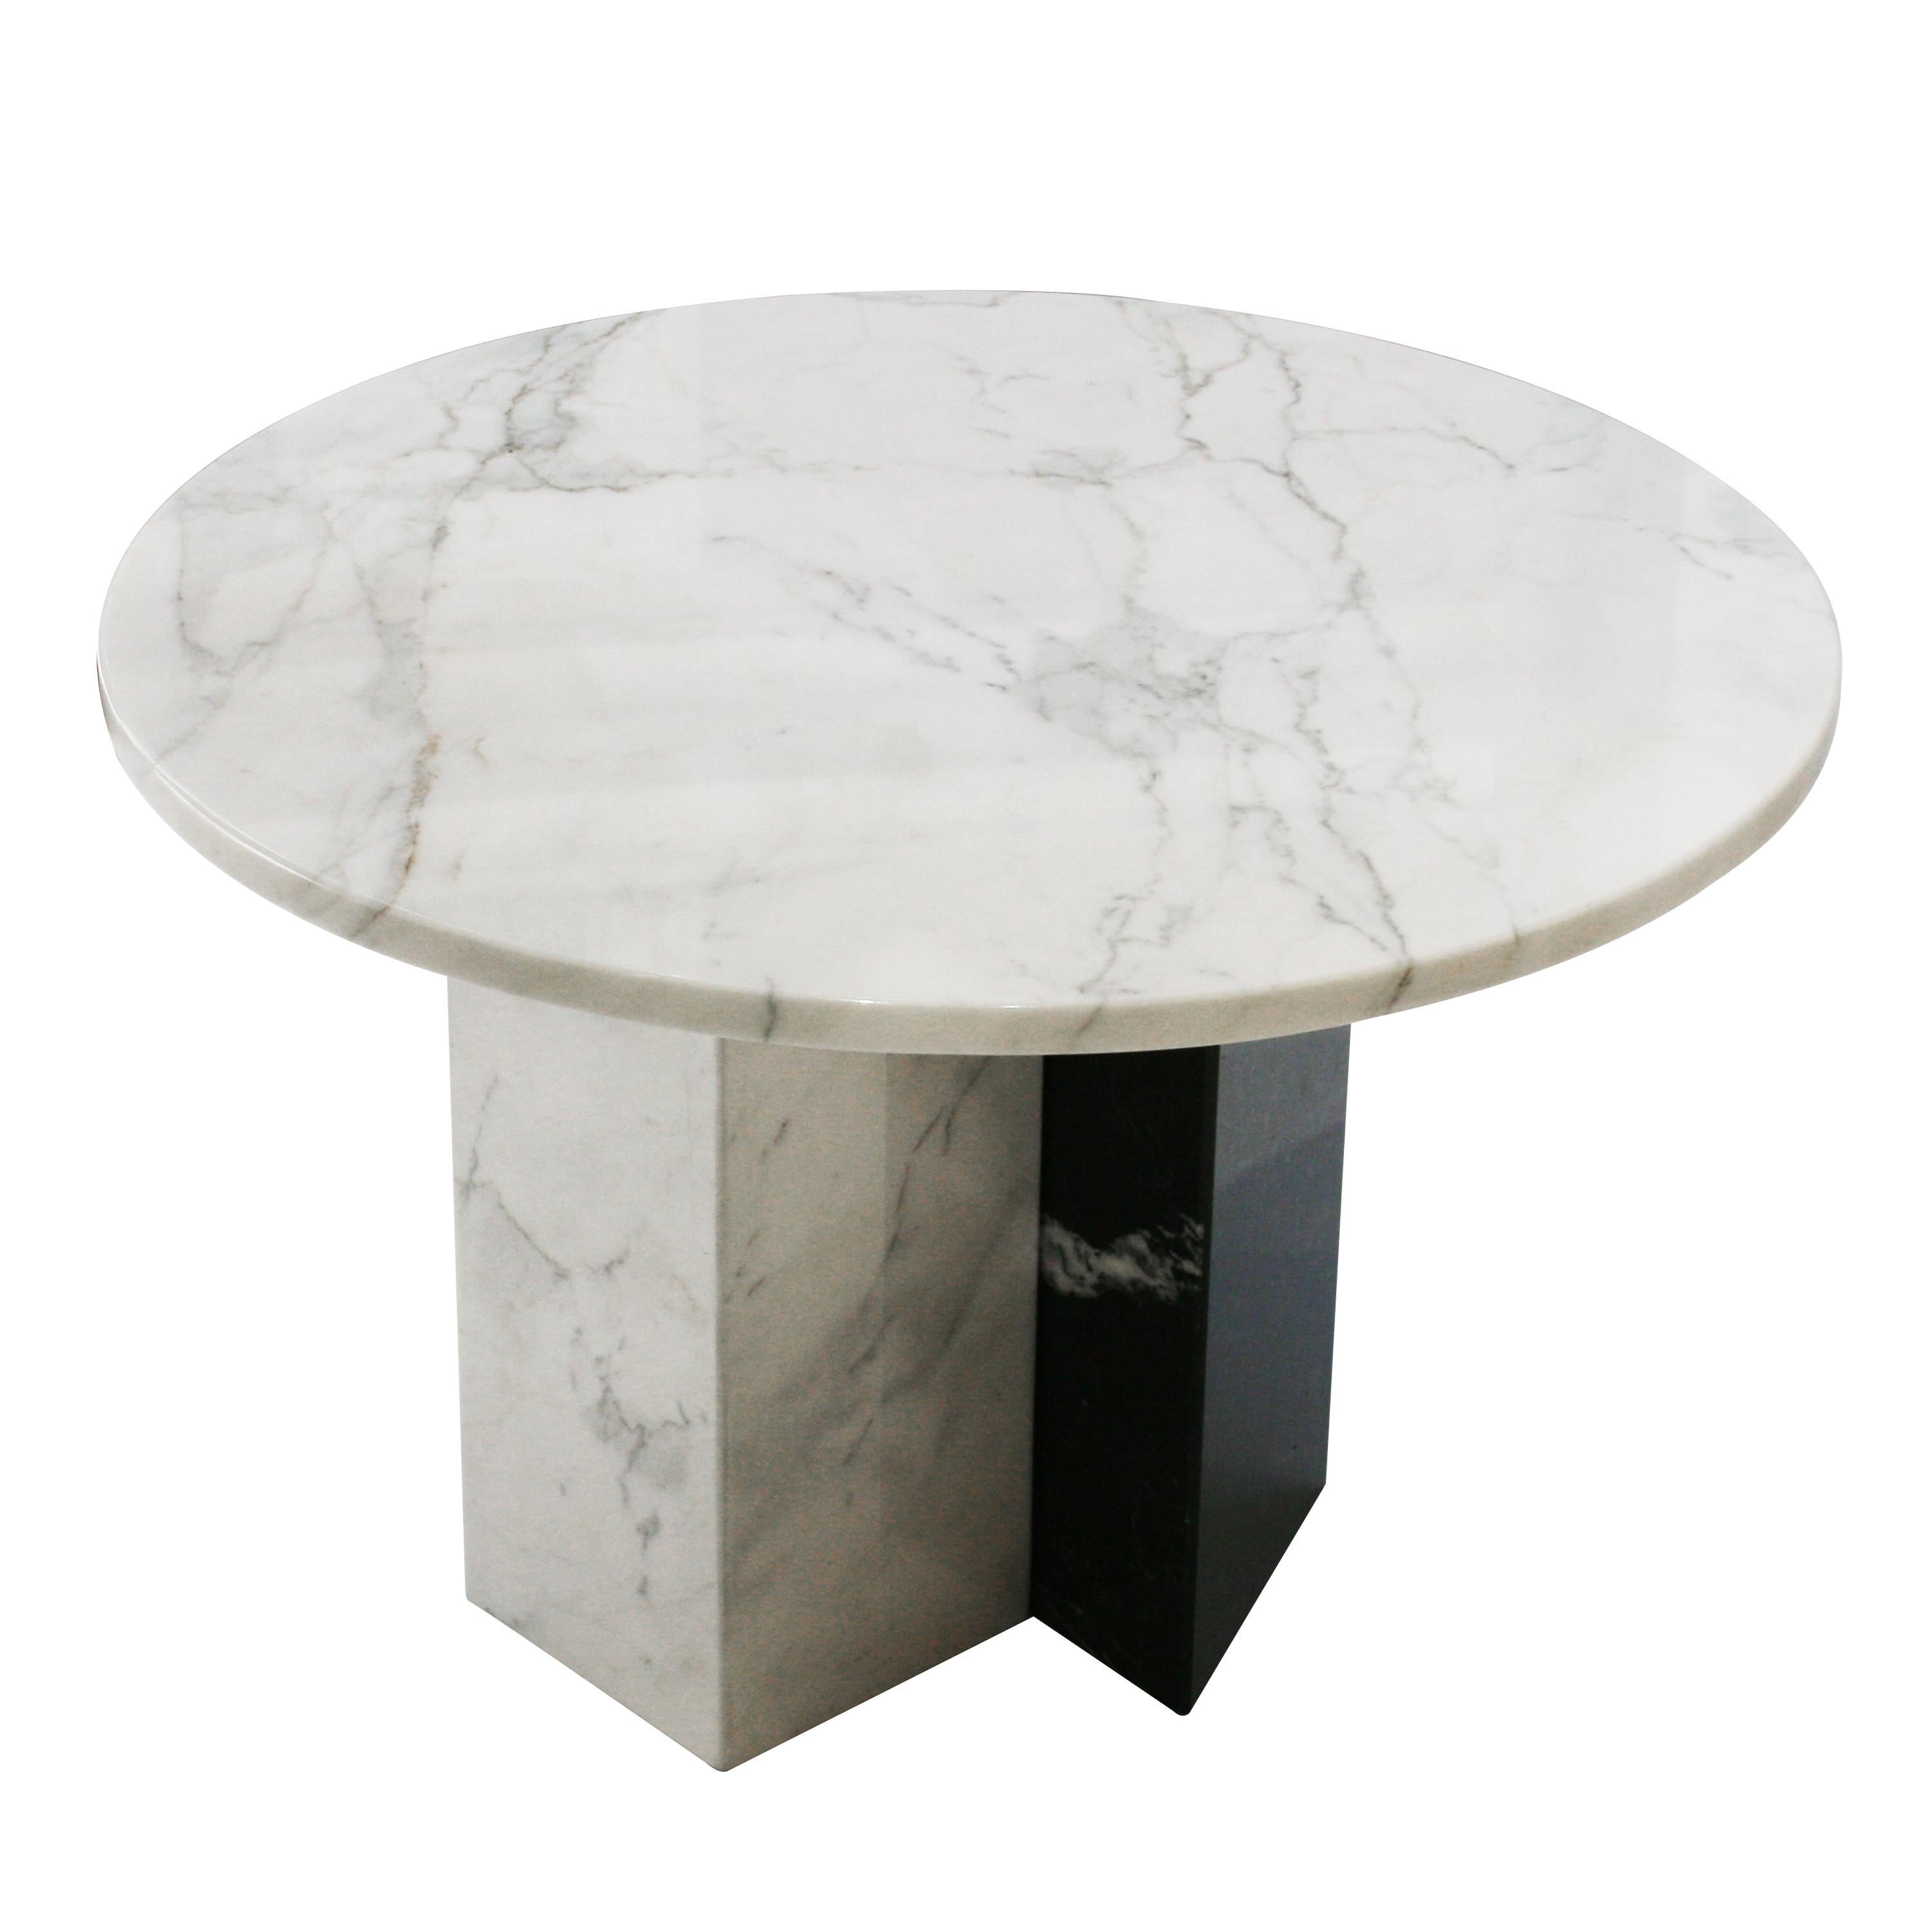 Spanish Contemporary Round Marble Coffee Table Design by IKB191, Spain, 2022 For Sale